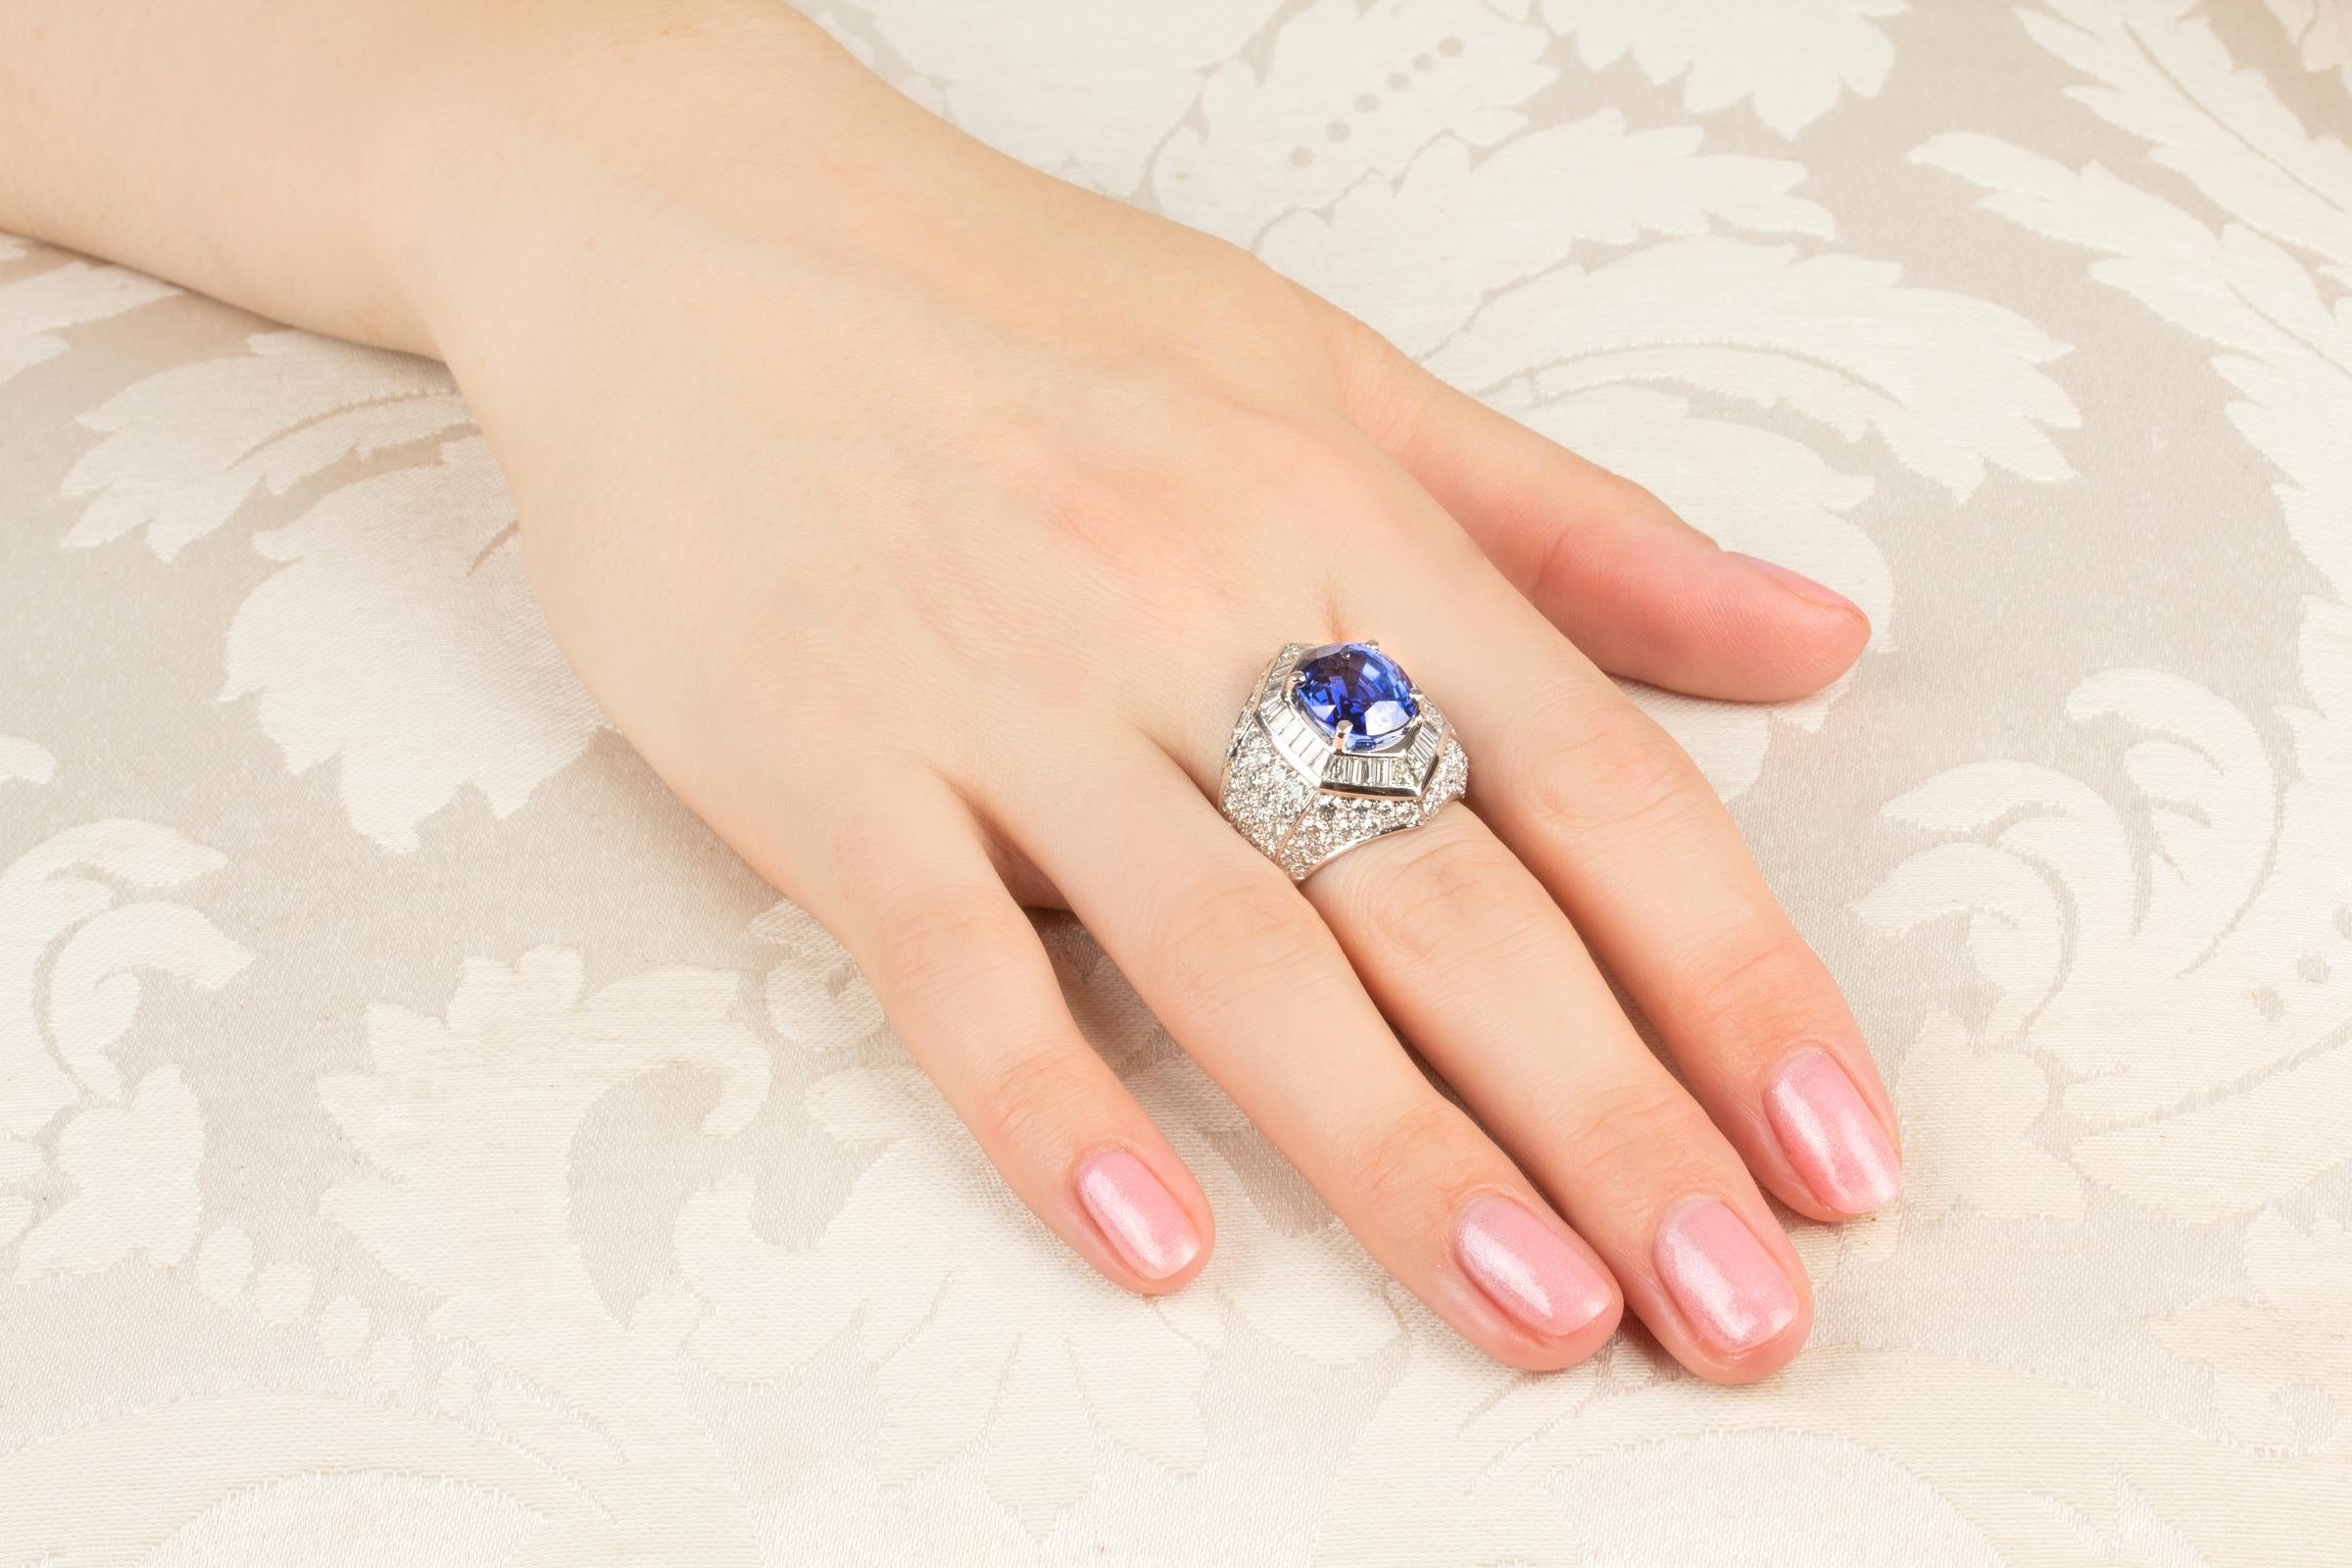 The blue sapphire and diamond cocktail ring features a splendid oval faceted Ceylon sapphire (8.19 carats) surrounded by a crown of especially cut tapered baguette diamonds (1.78 carats). The design is complete with pavé set round diamonds of top